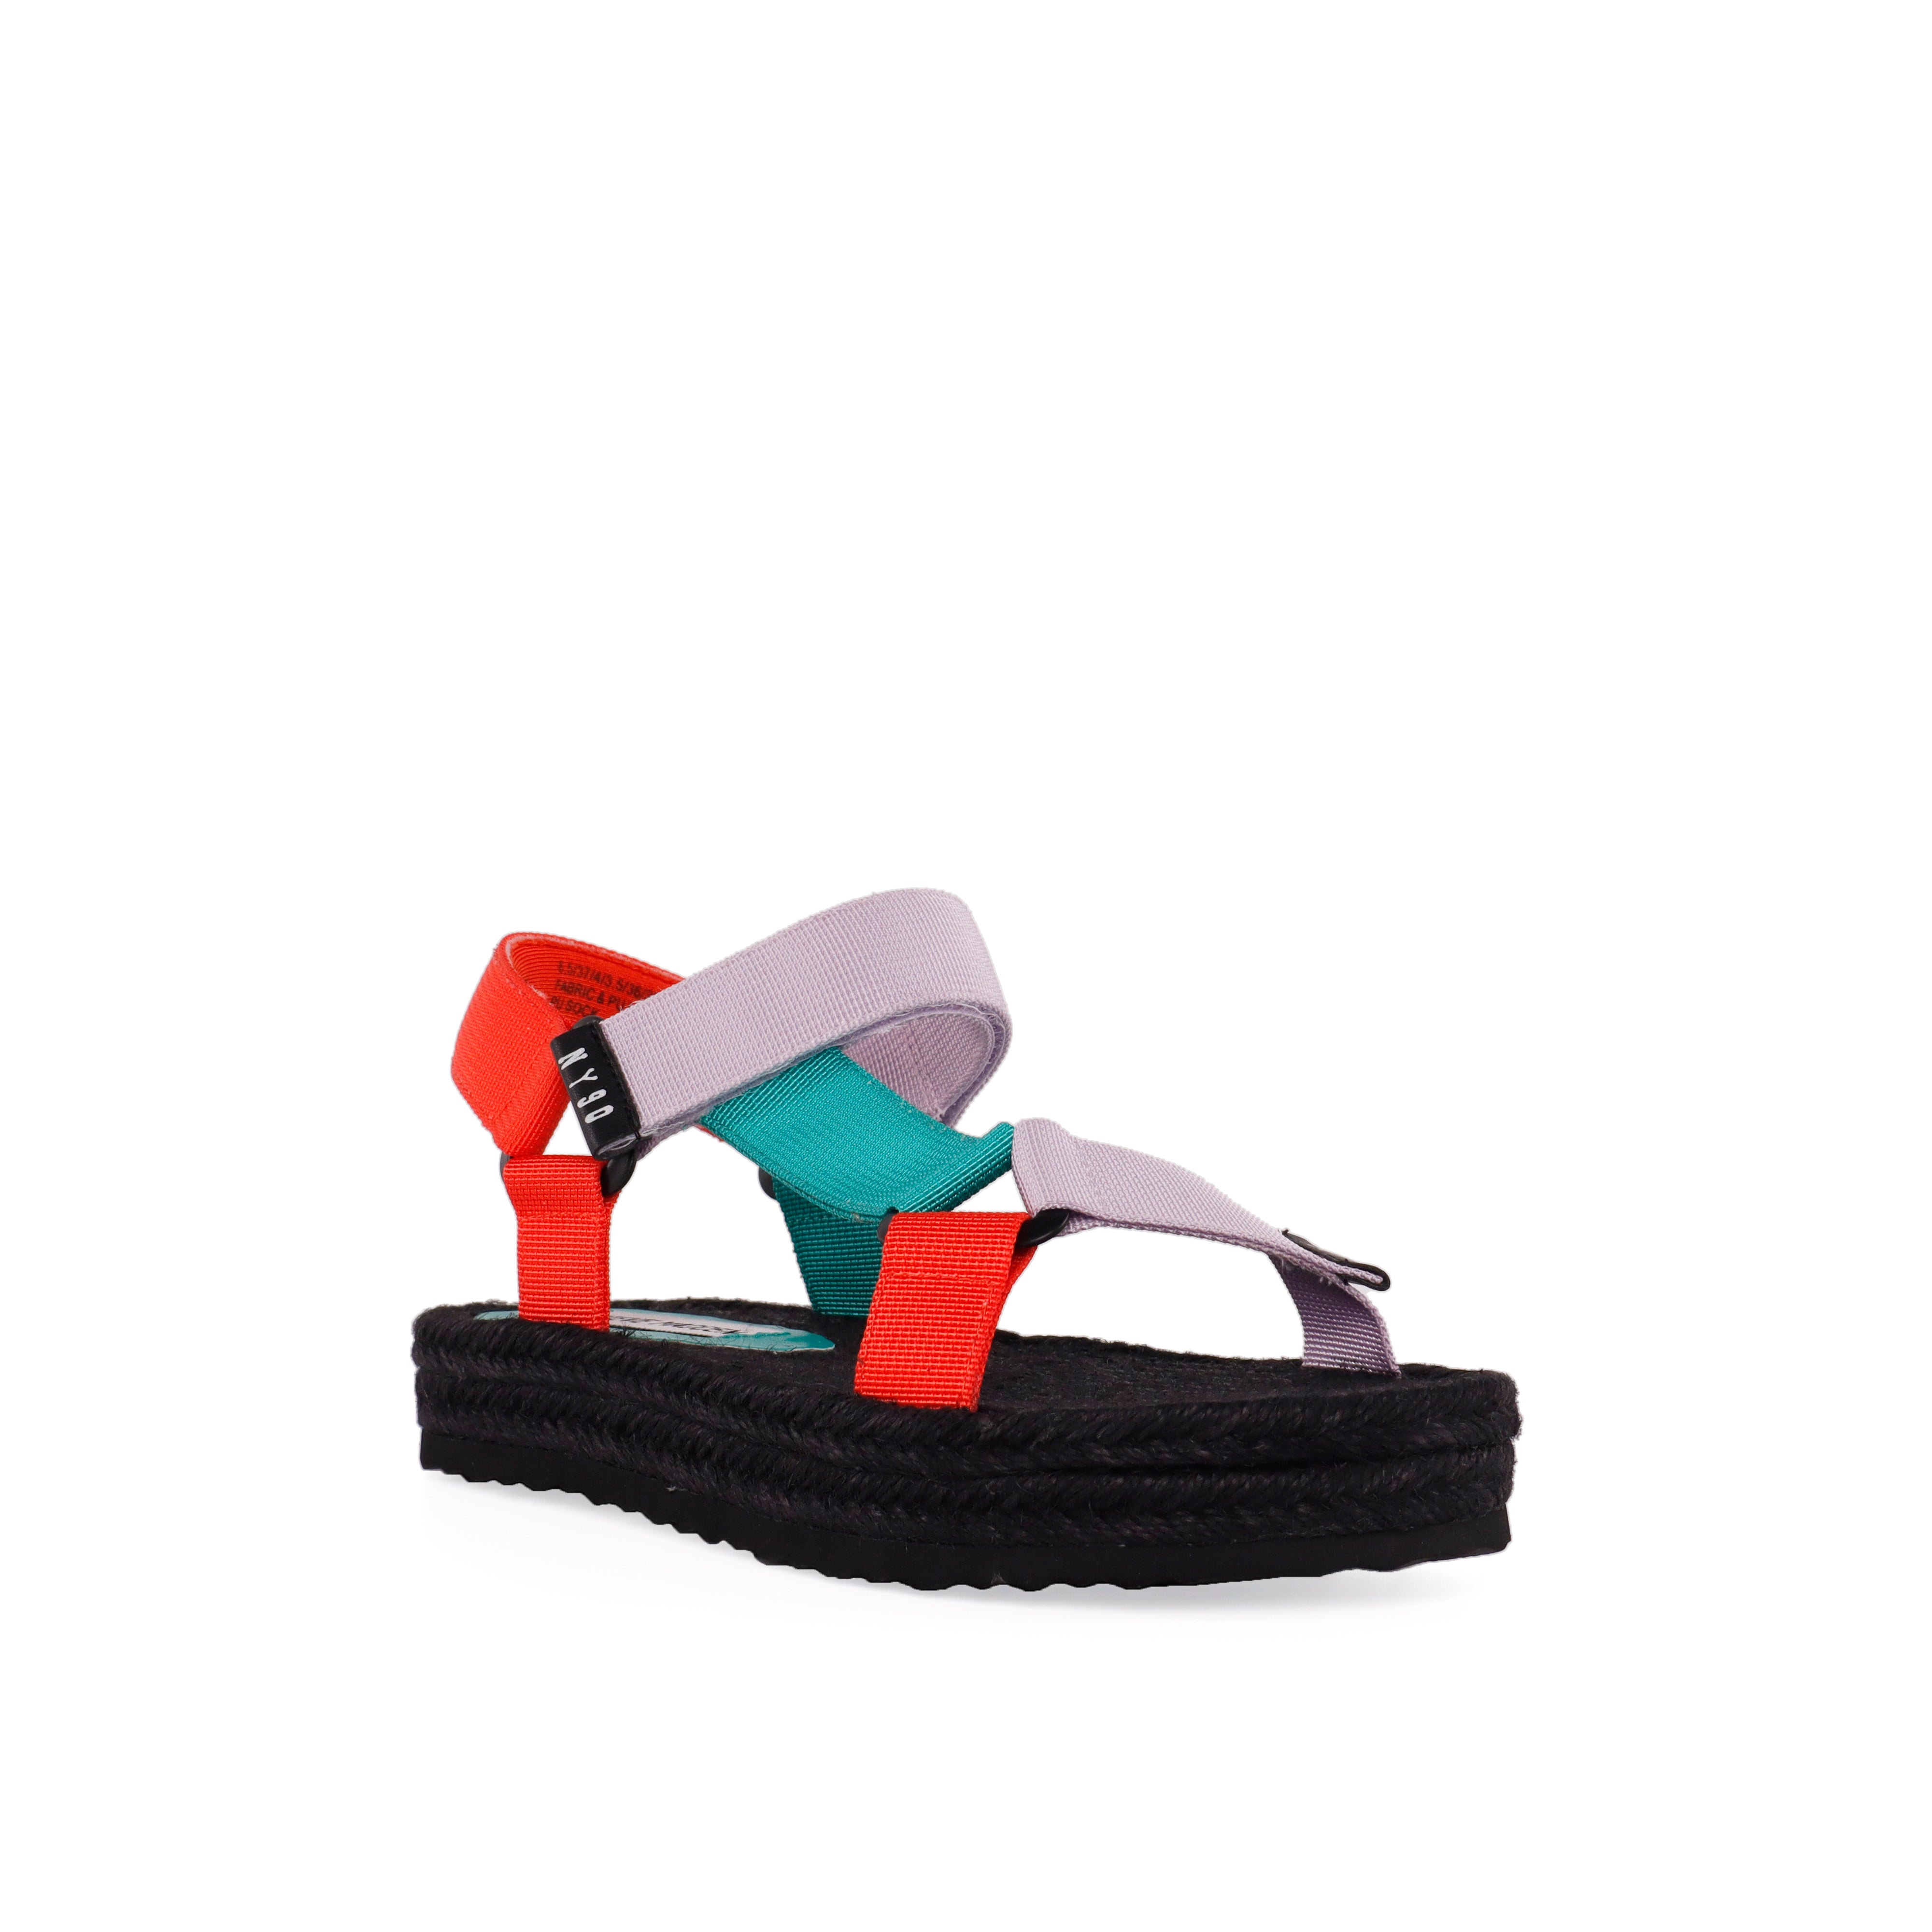 RADIUS RED/TEAL SANDALS- Hover Image